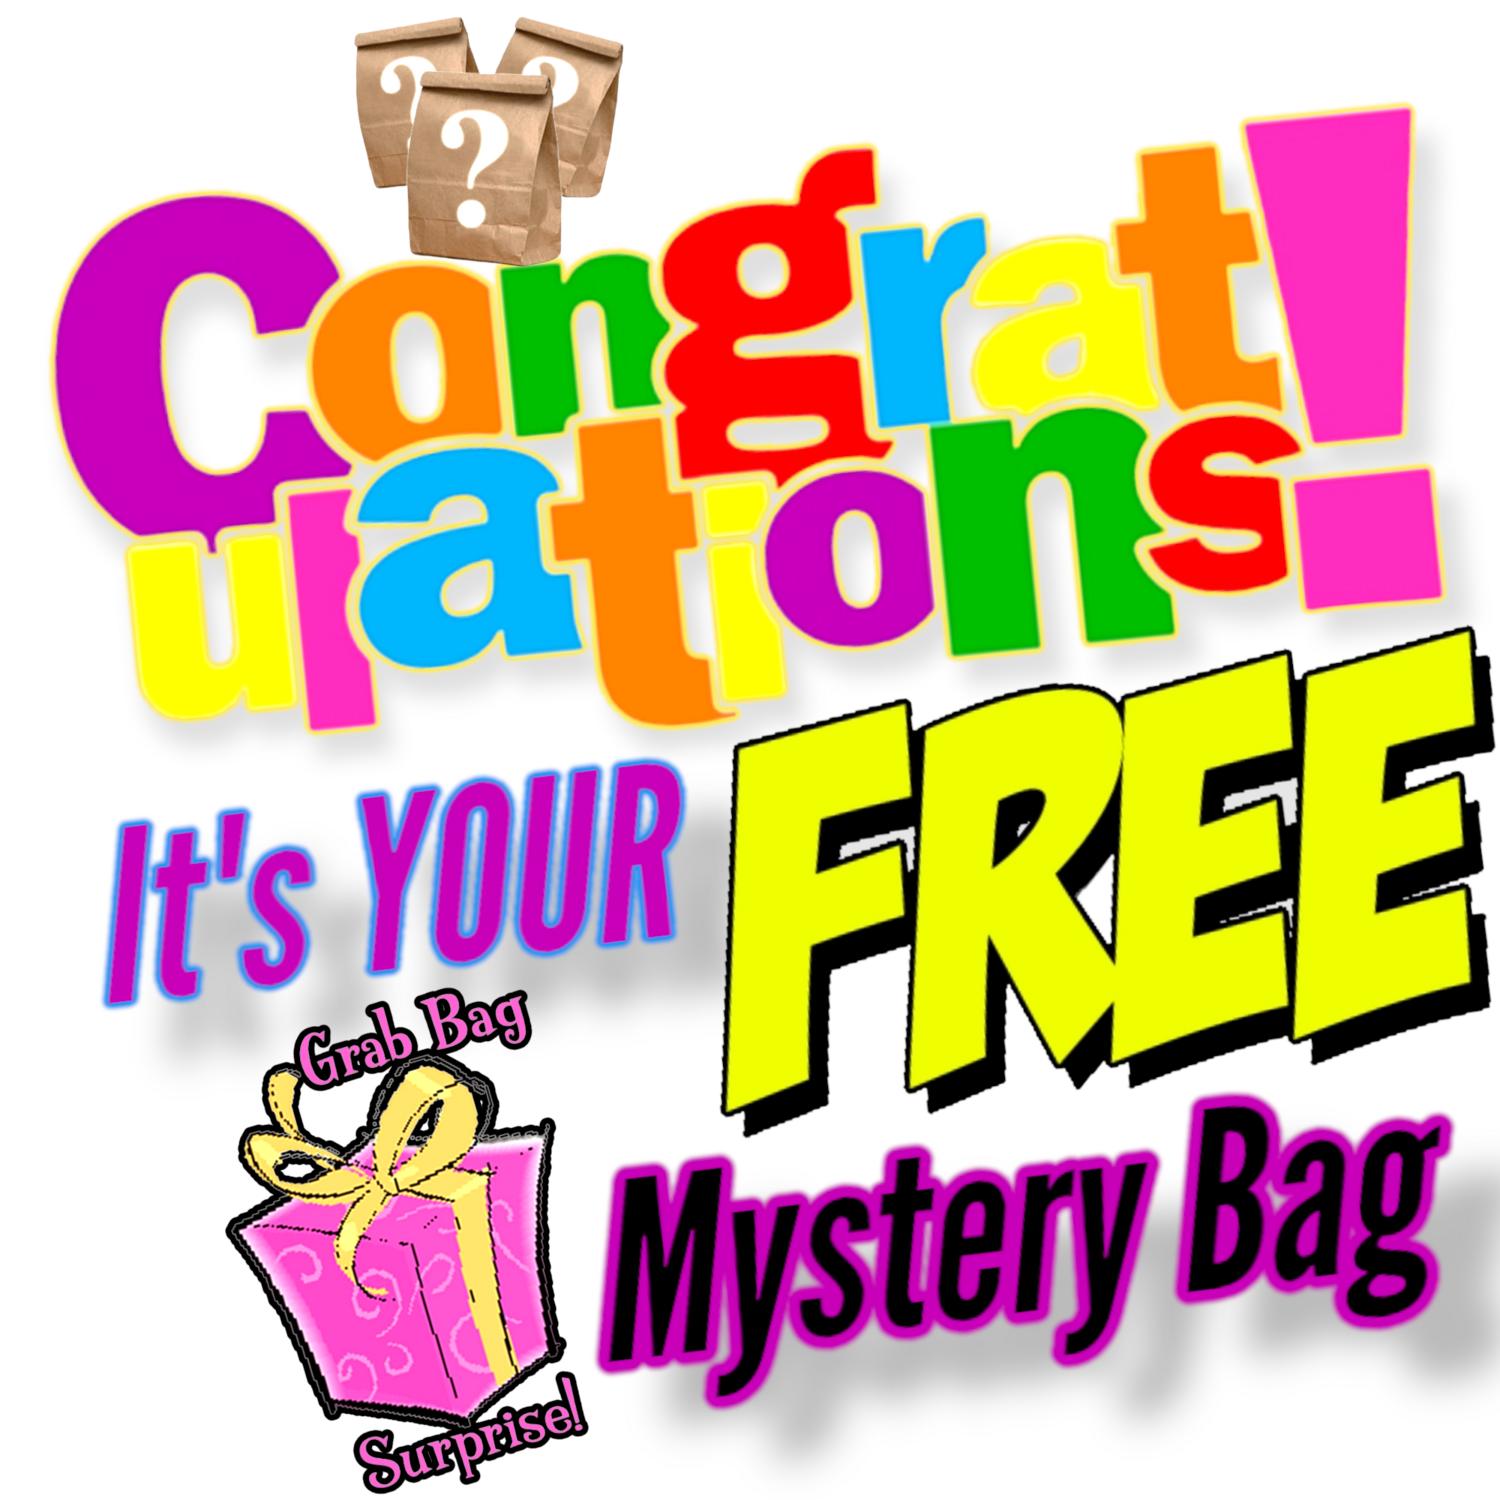 Congrats its your Free mystery bag claim now to enter the golden ticket contest